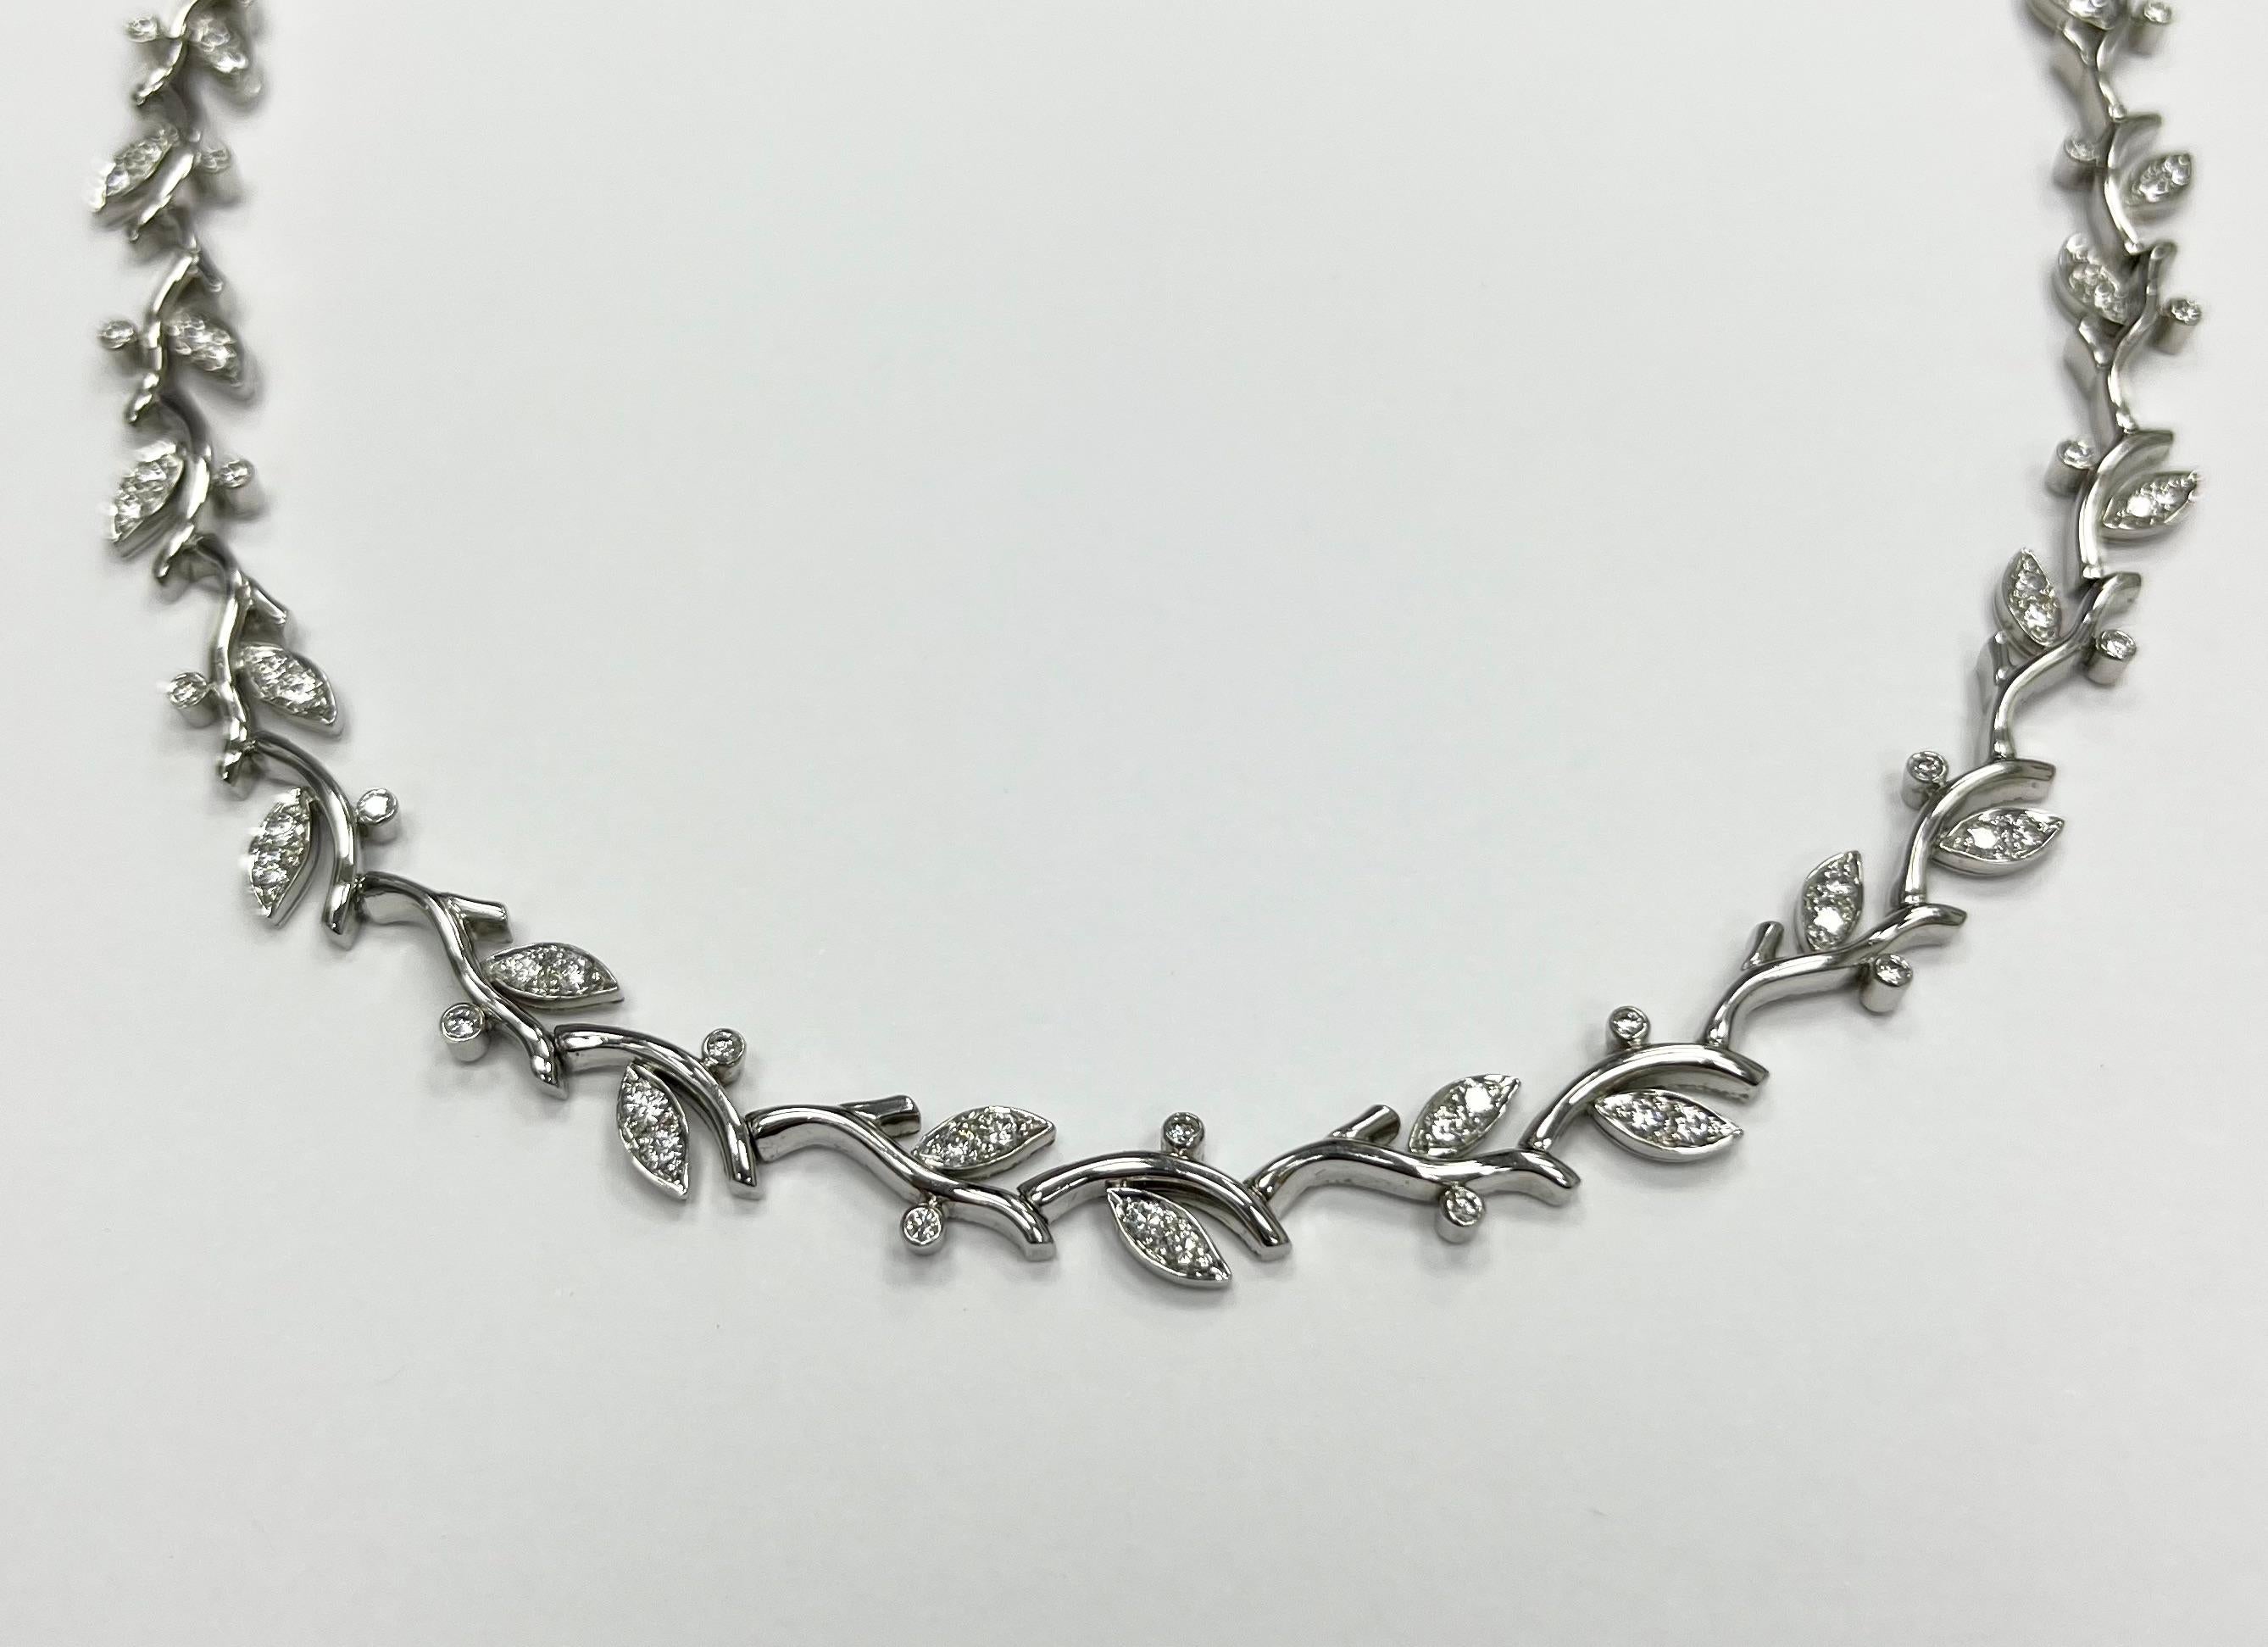 Tiffany & Co Platinum Diamond Leaf Necklace In Excellent Condition For Sale In New York, NY